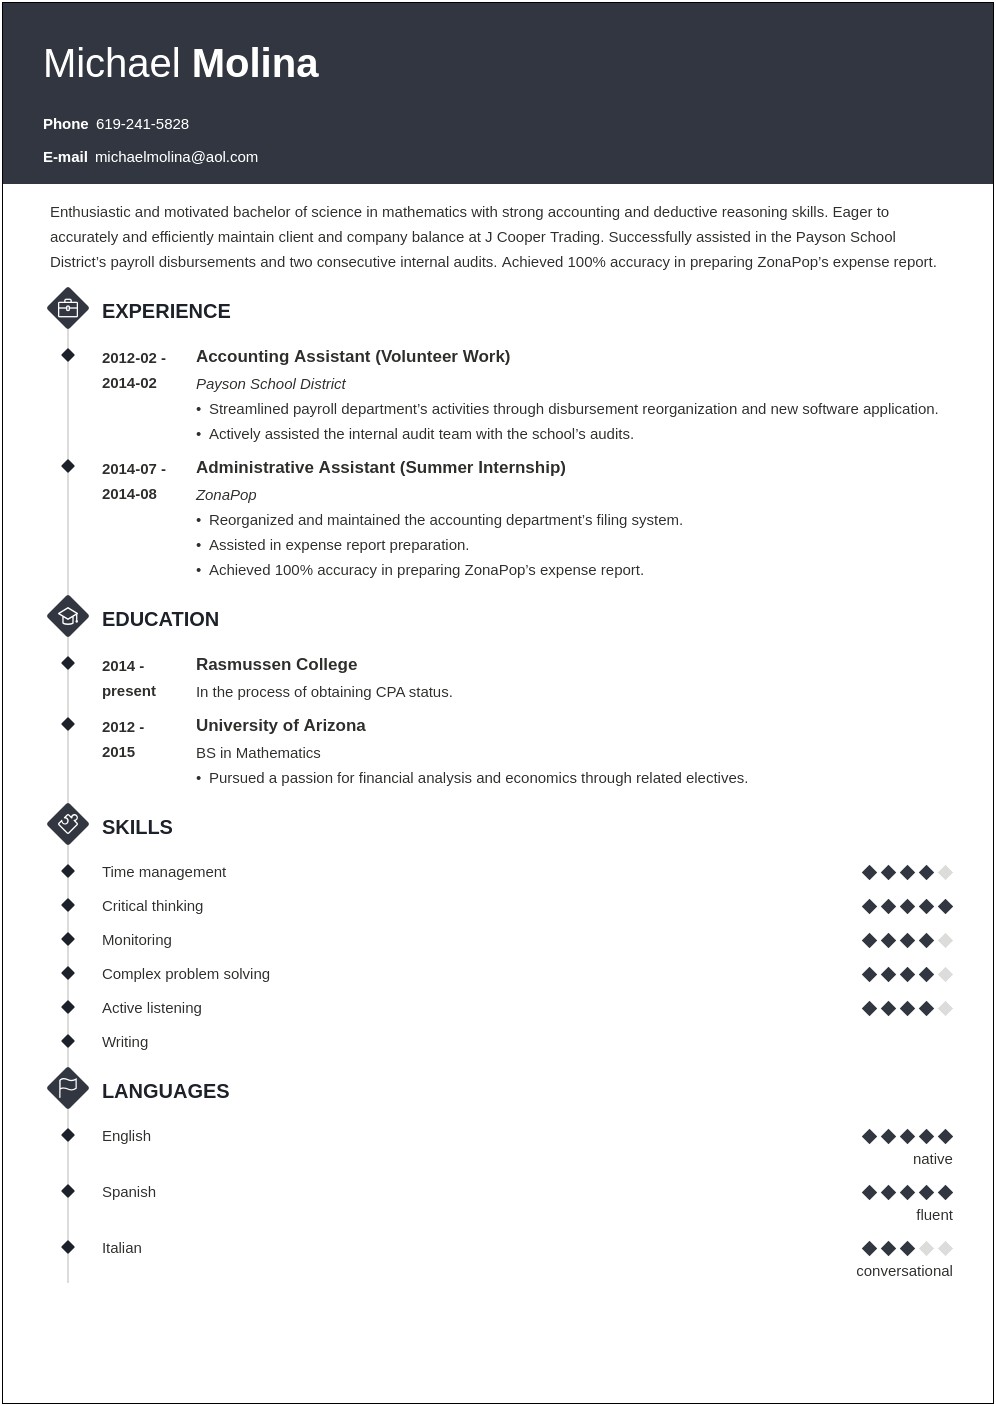 Resume Objective Entry Level Accounting